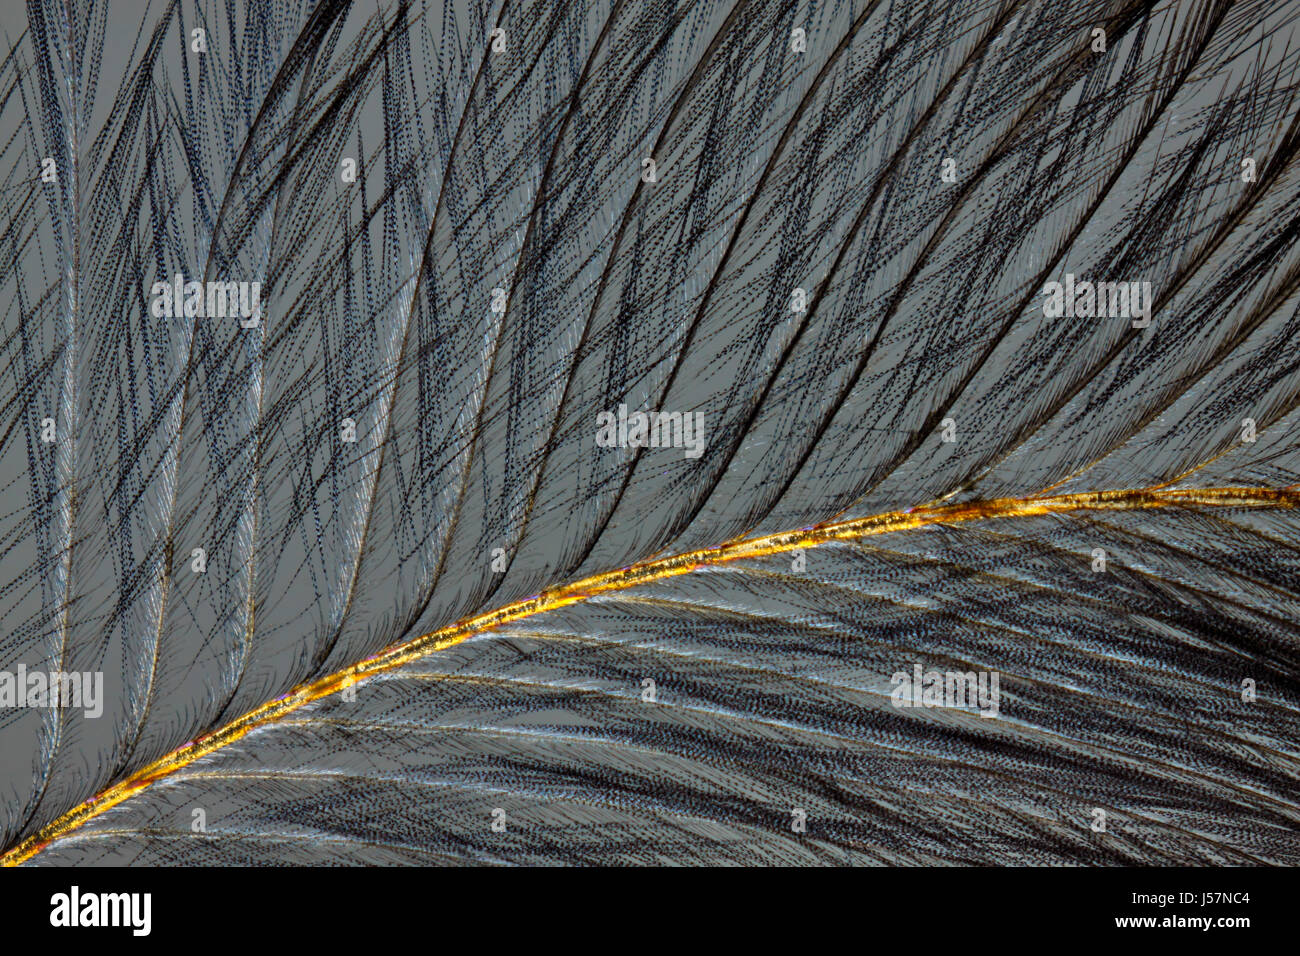 Microscopic view of a bird feather. Polarized light, partially crossed polarizers. Stock Photo